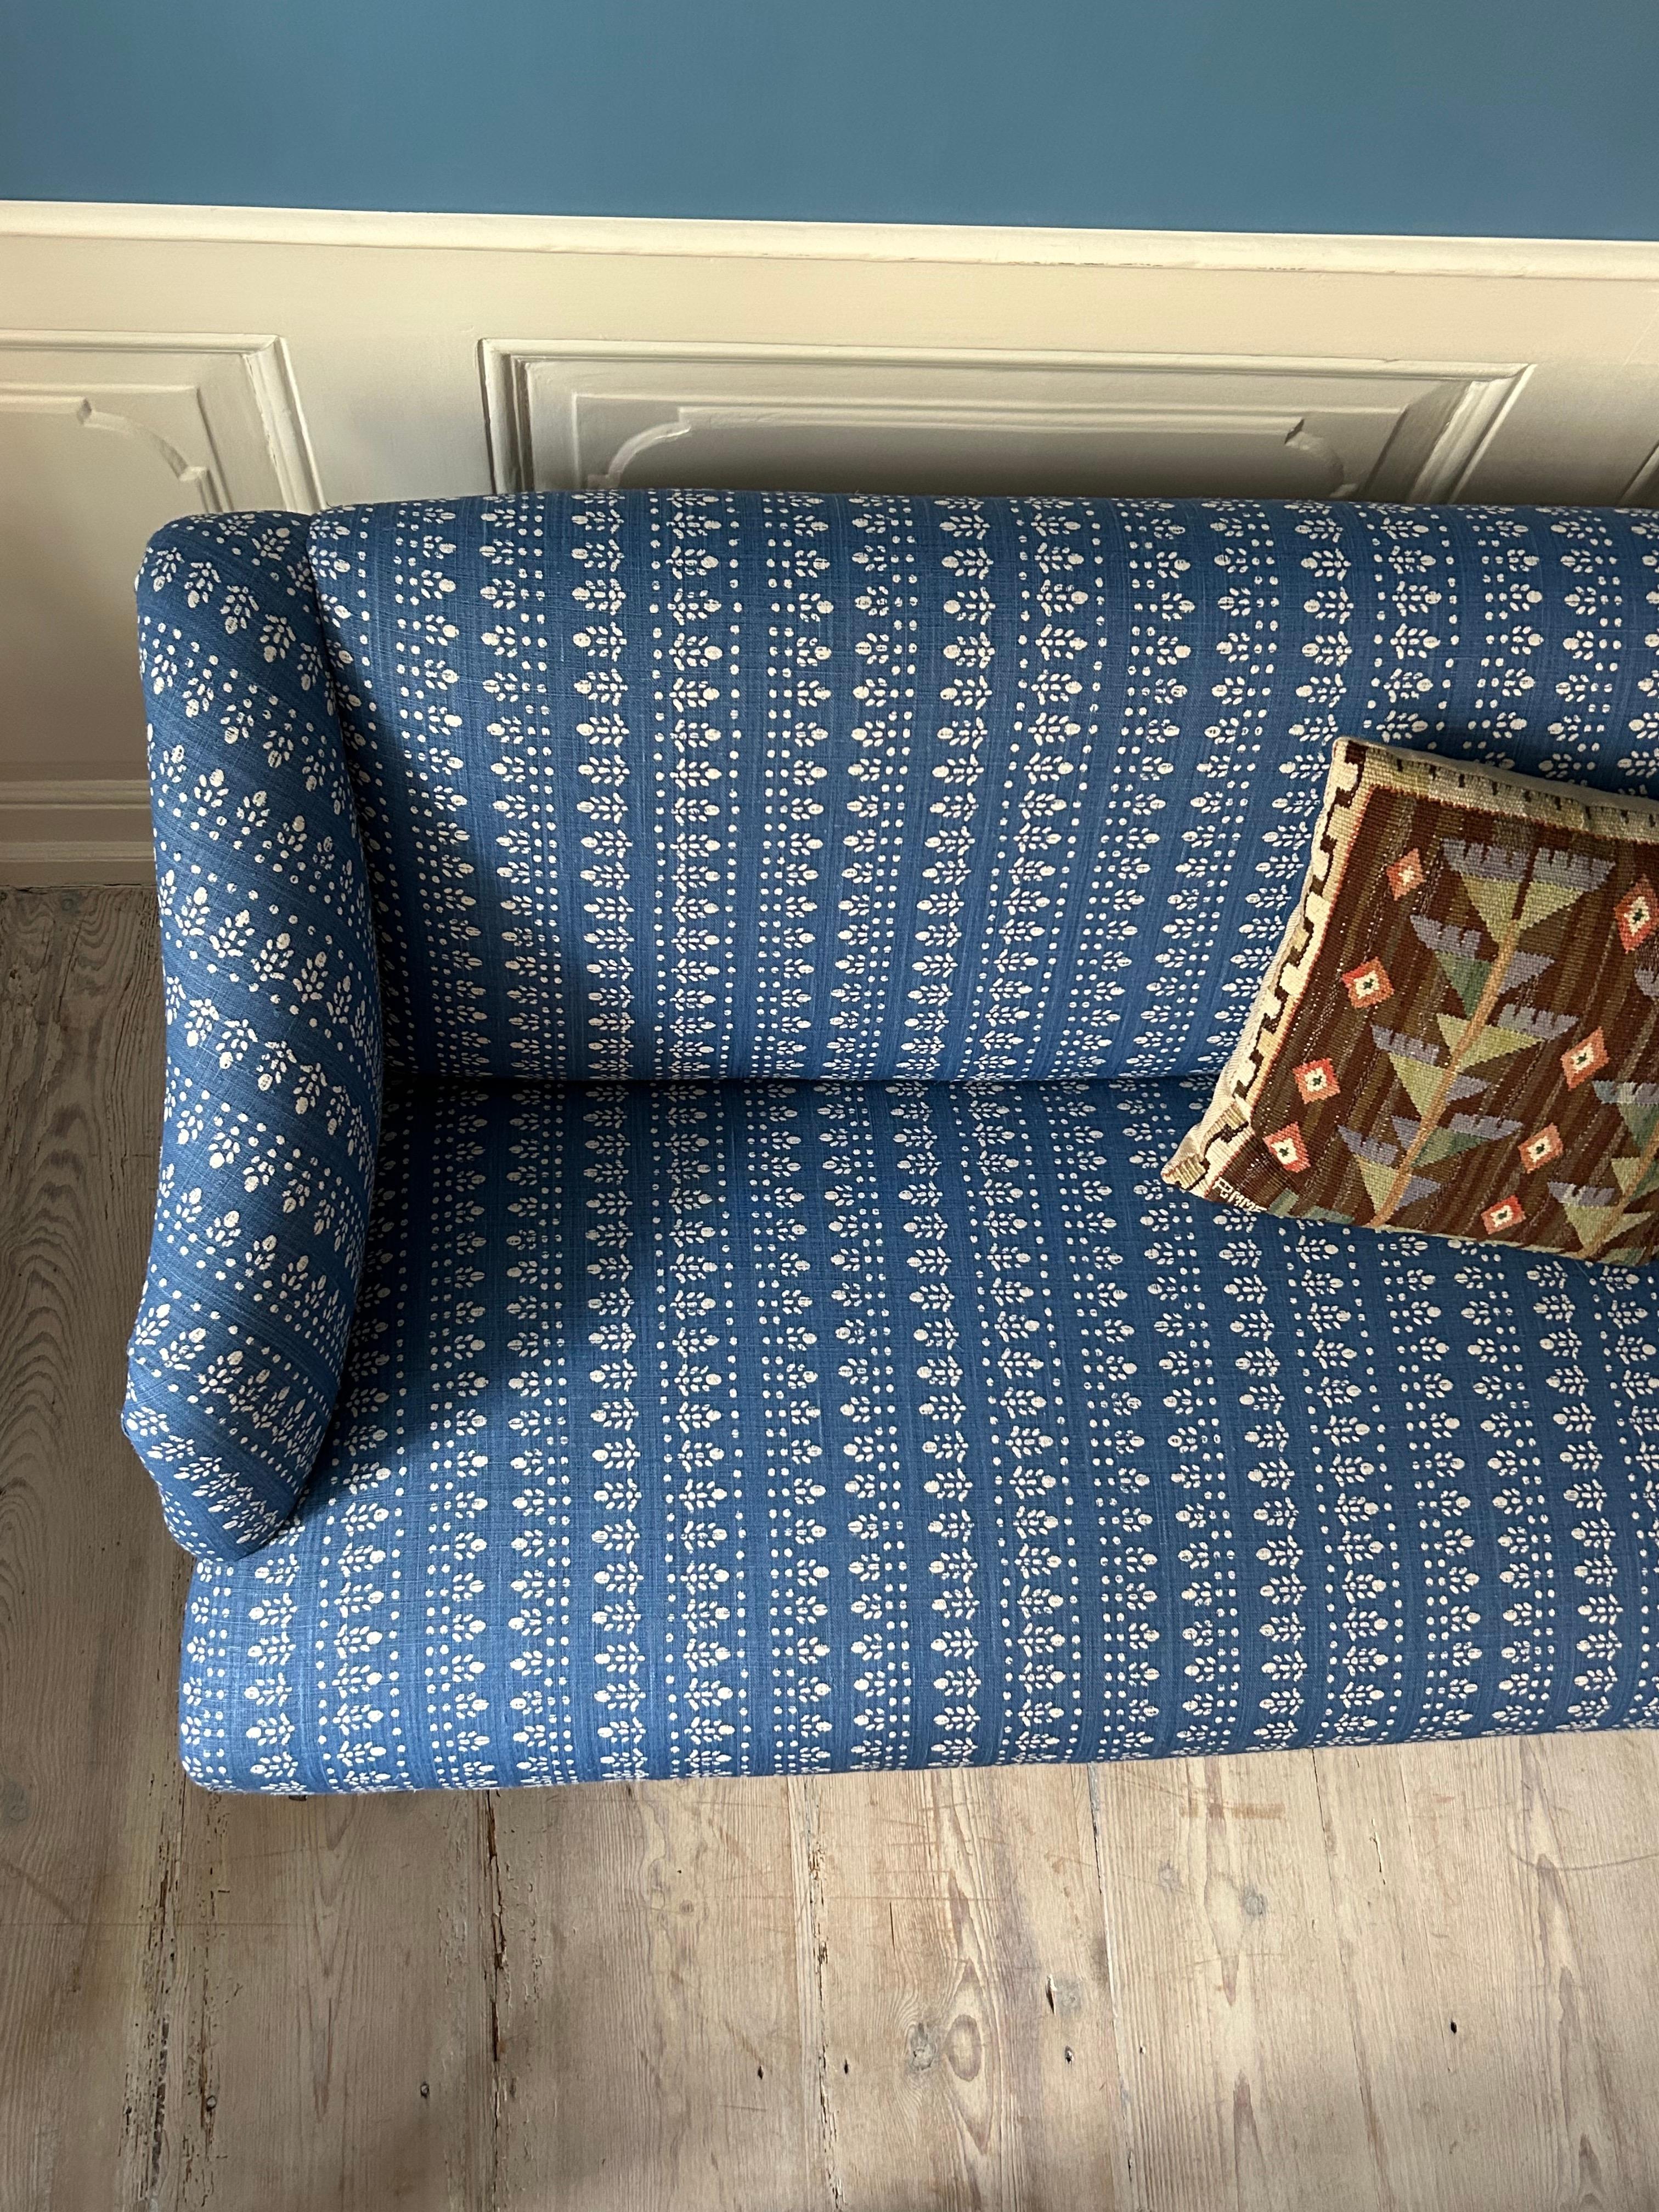 Contemporary Sofa in Customized Blue Upholstery by the Apartment, Belgium, 2020s For Sale 3